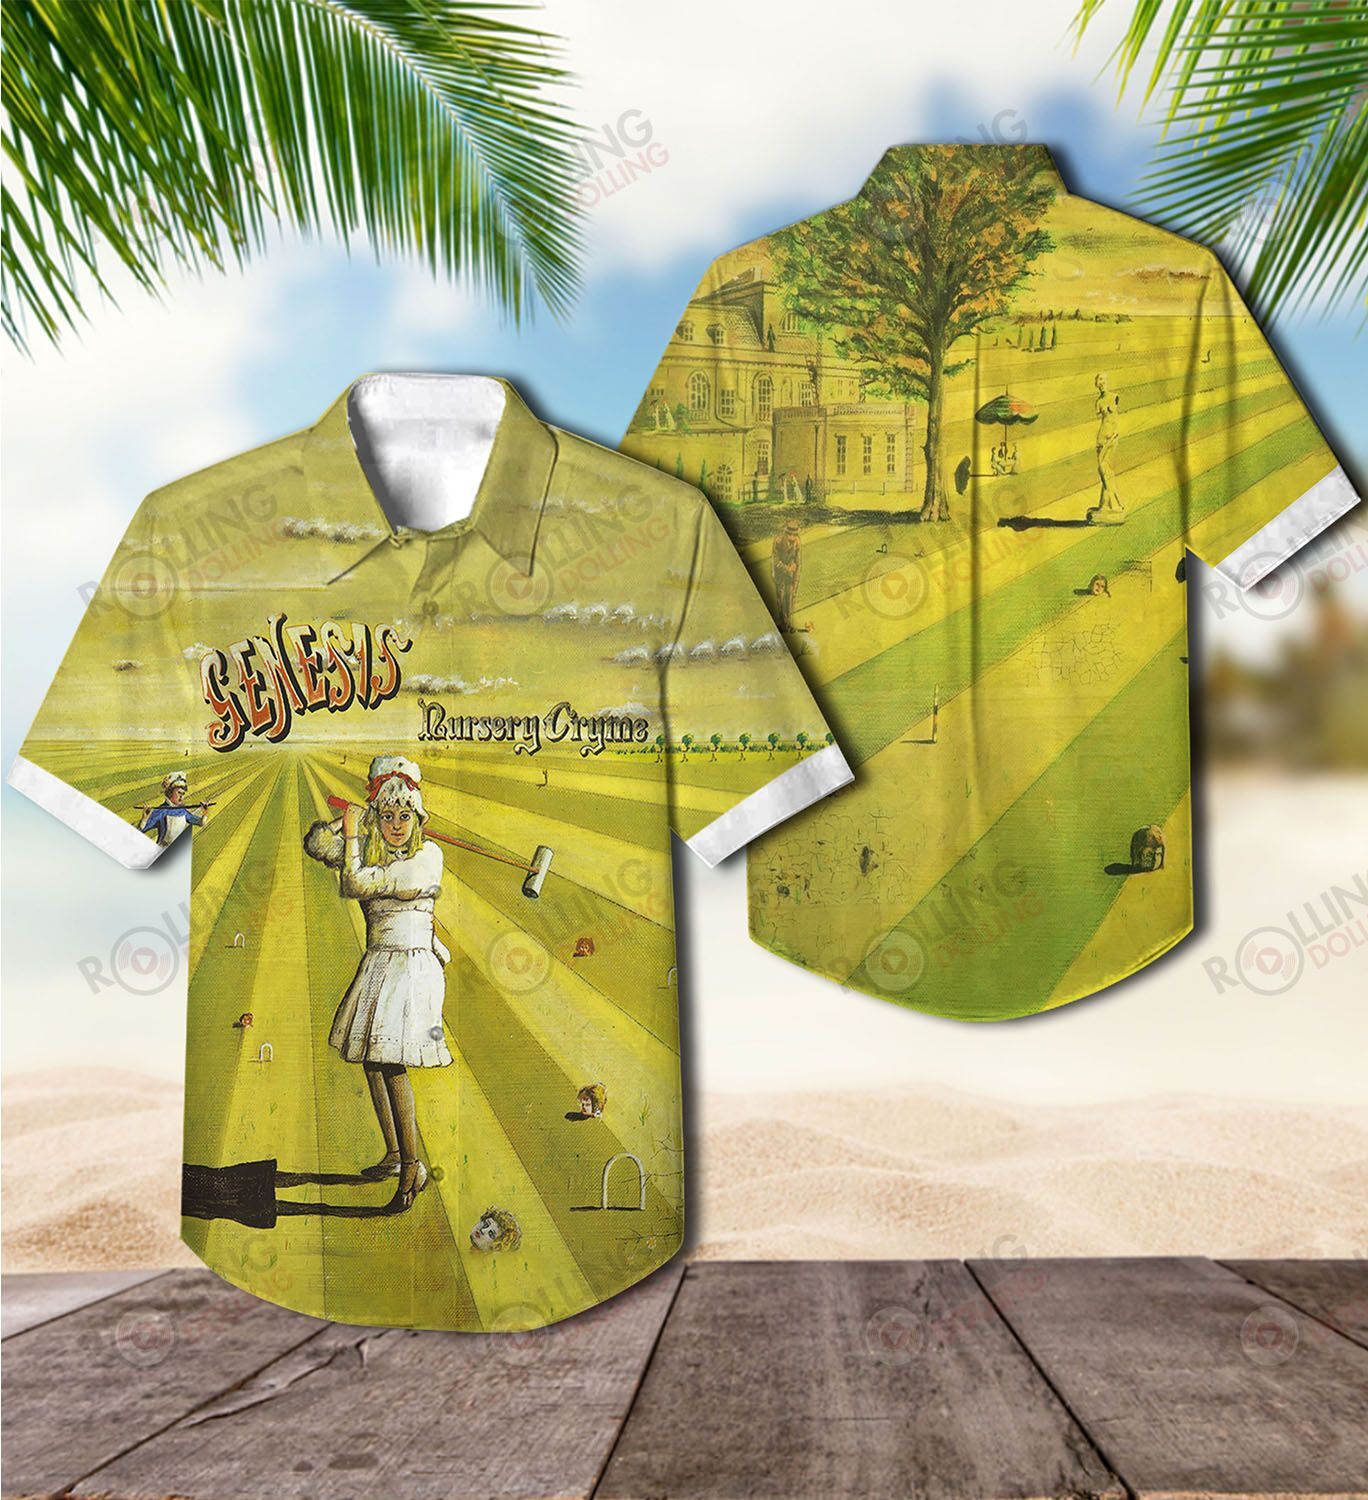 The Hawaiian Shirt is a popular shirt that is worn by Rock band fans 78